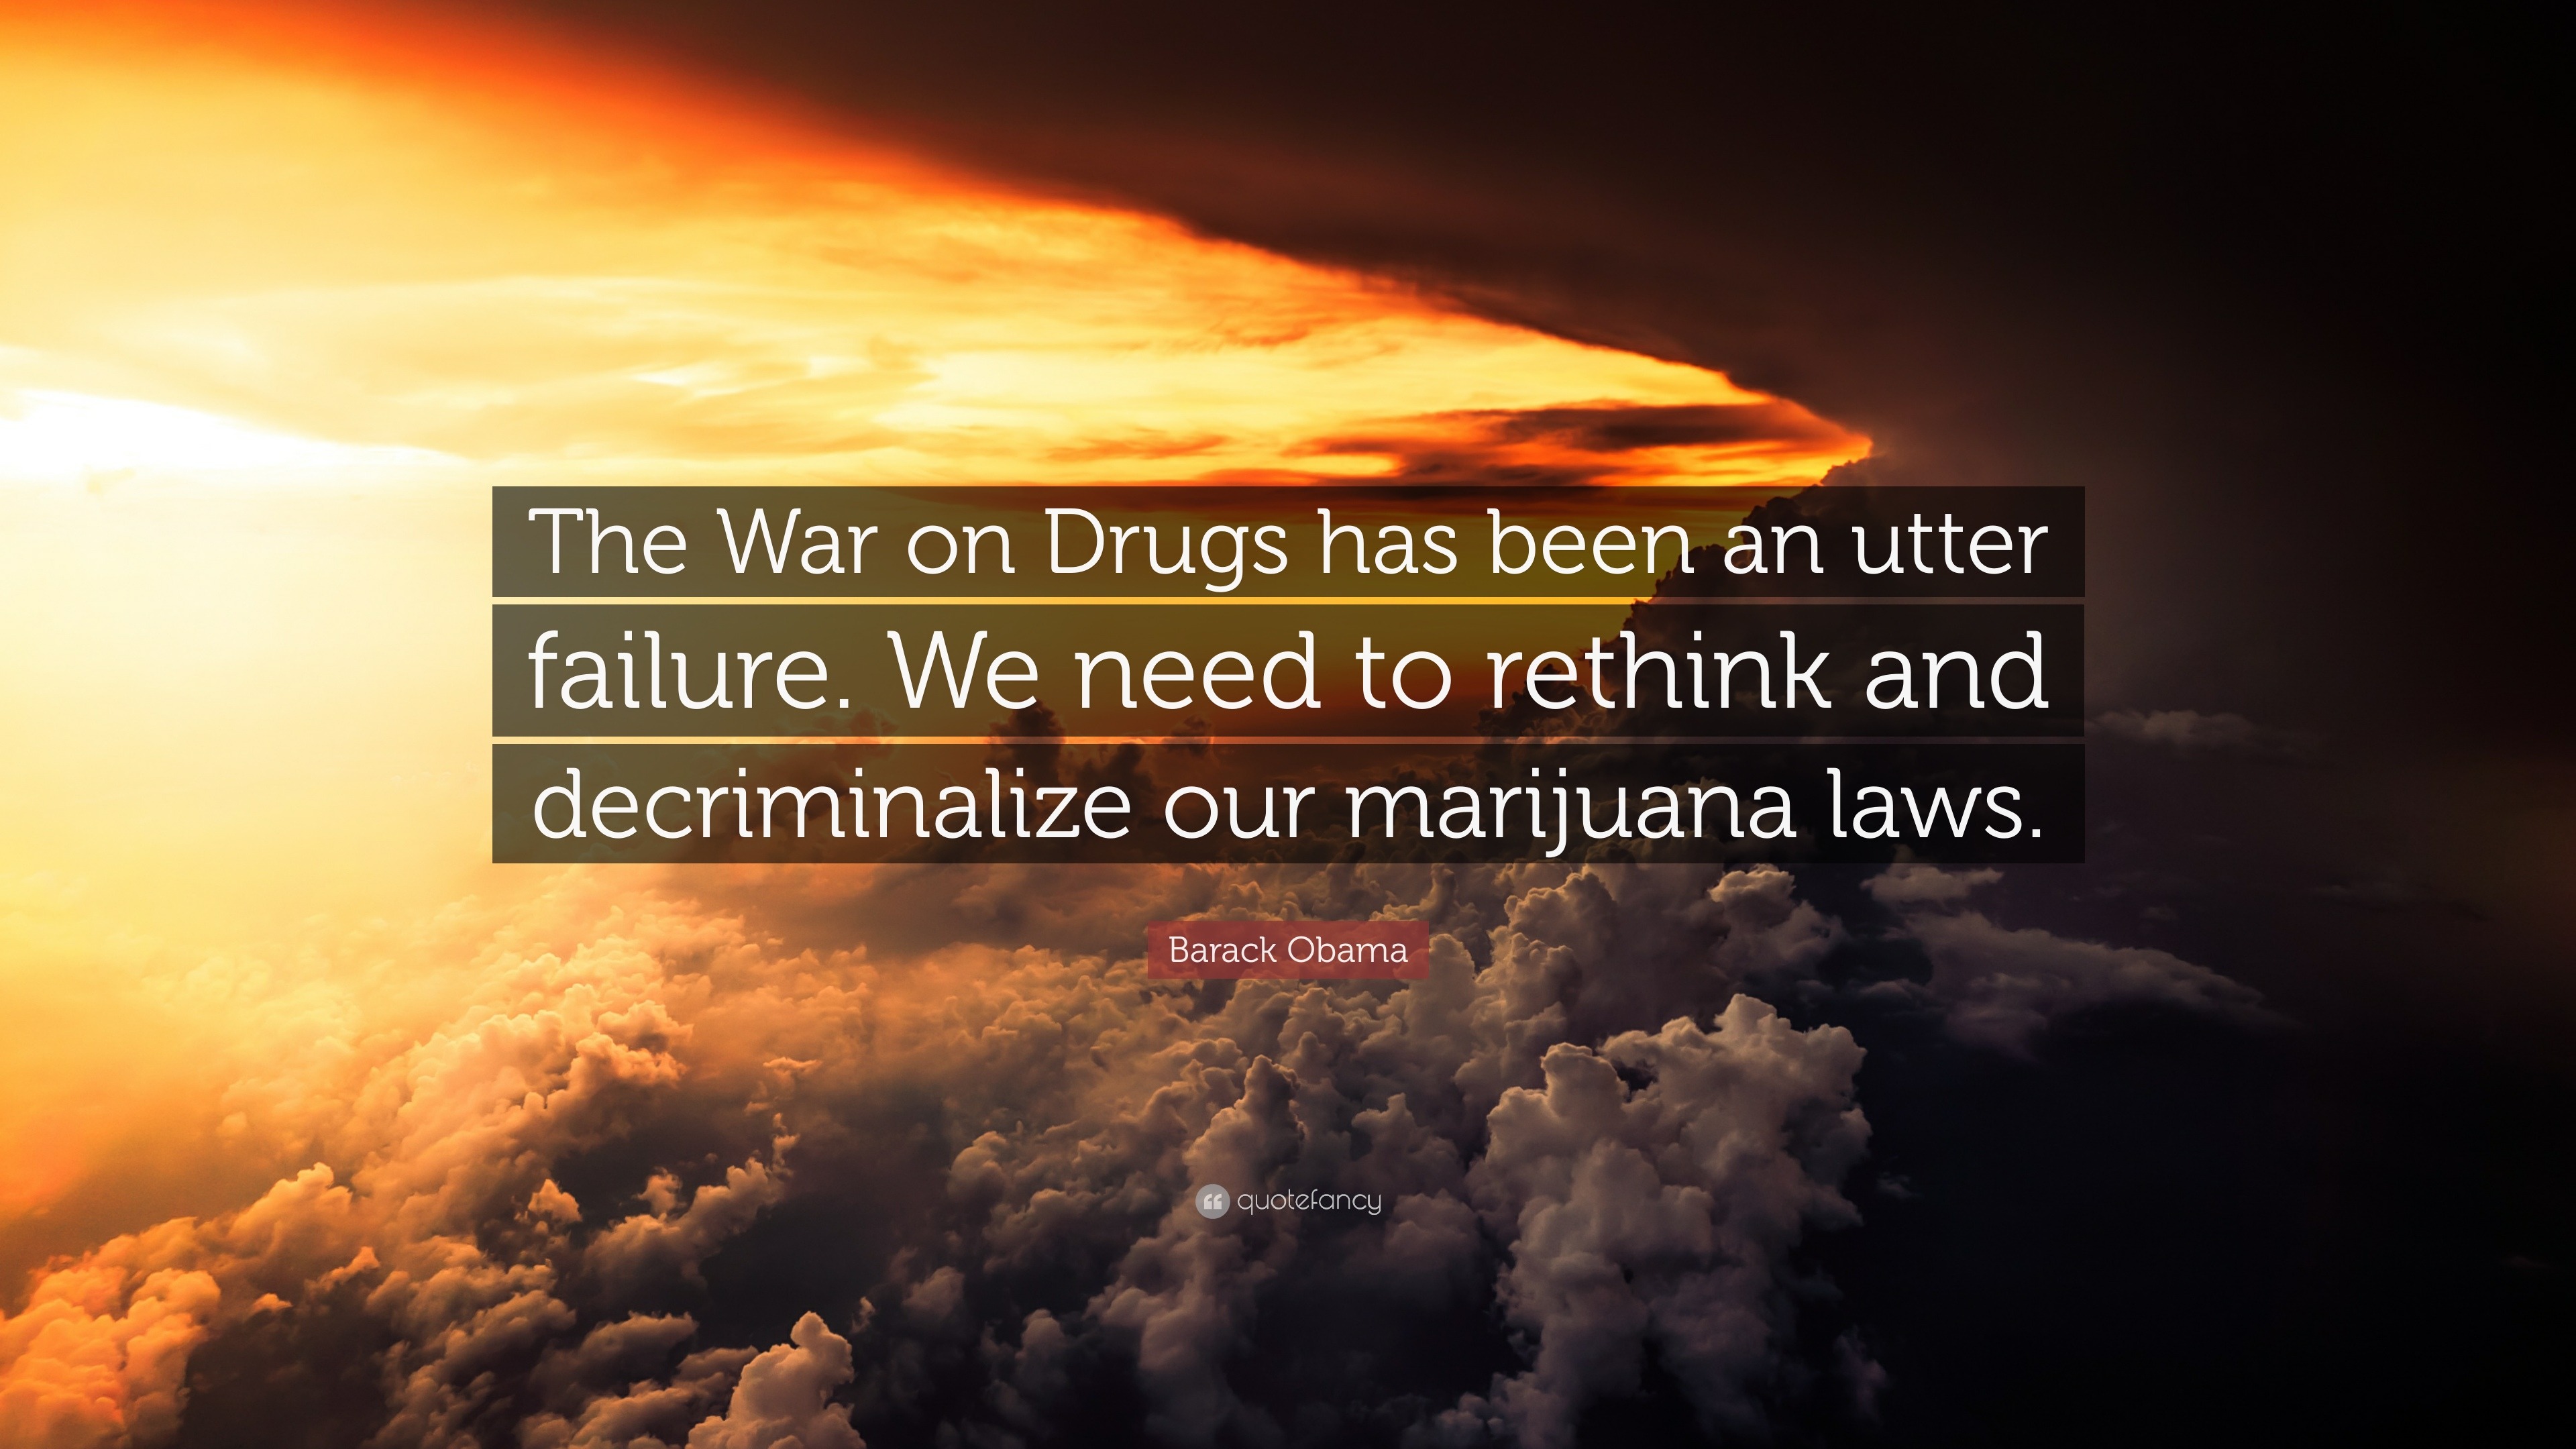 Barack Obama Quote: “The War on Drugs has been an utter failure. We